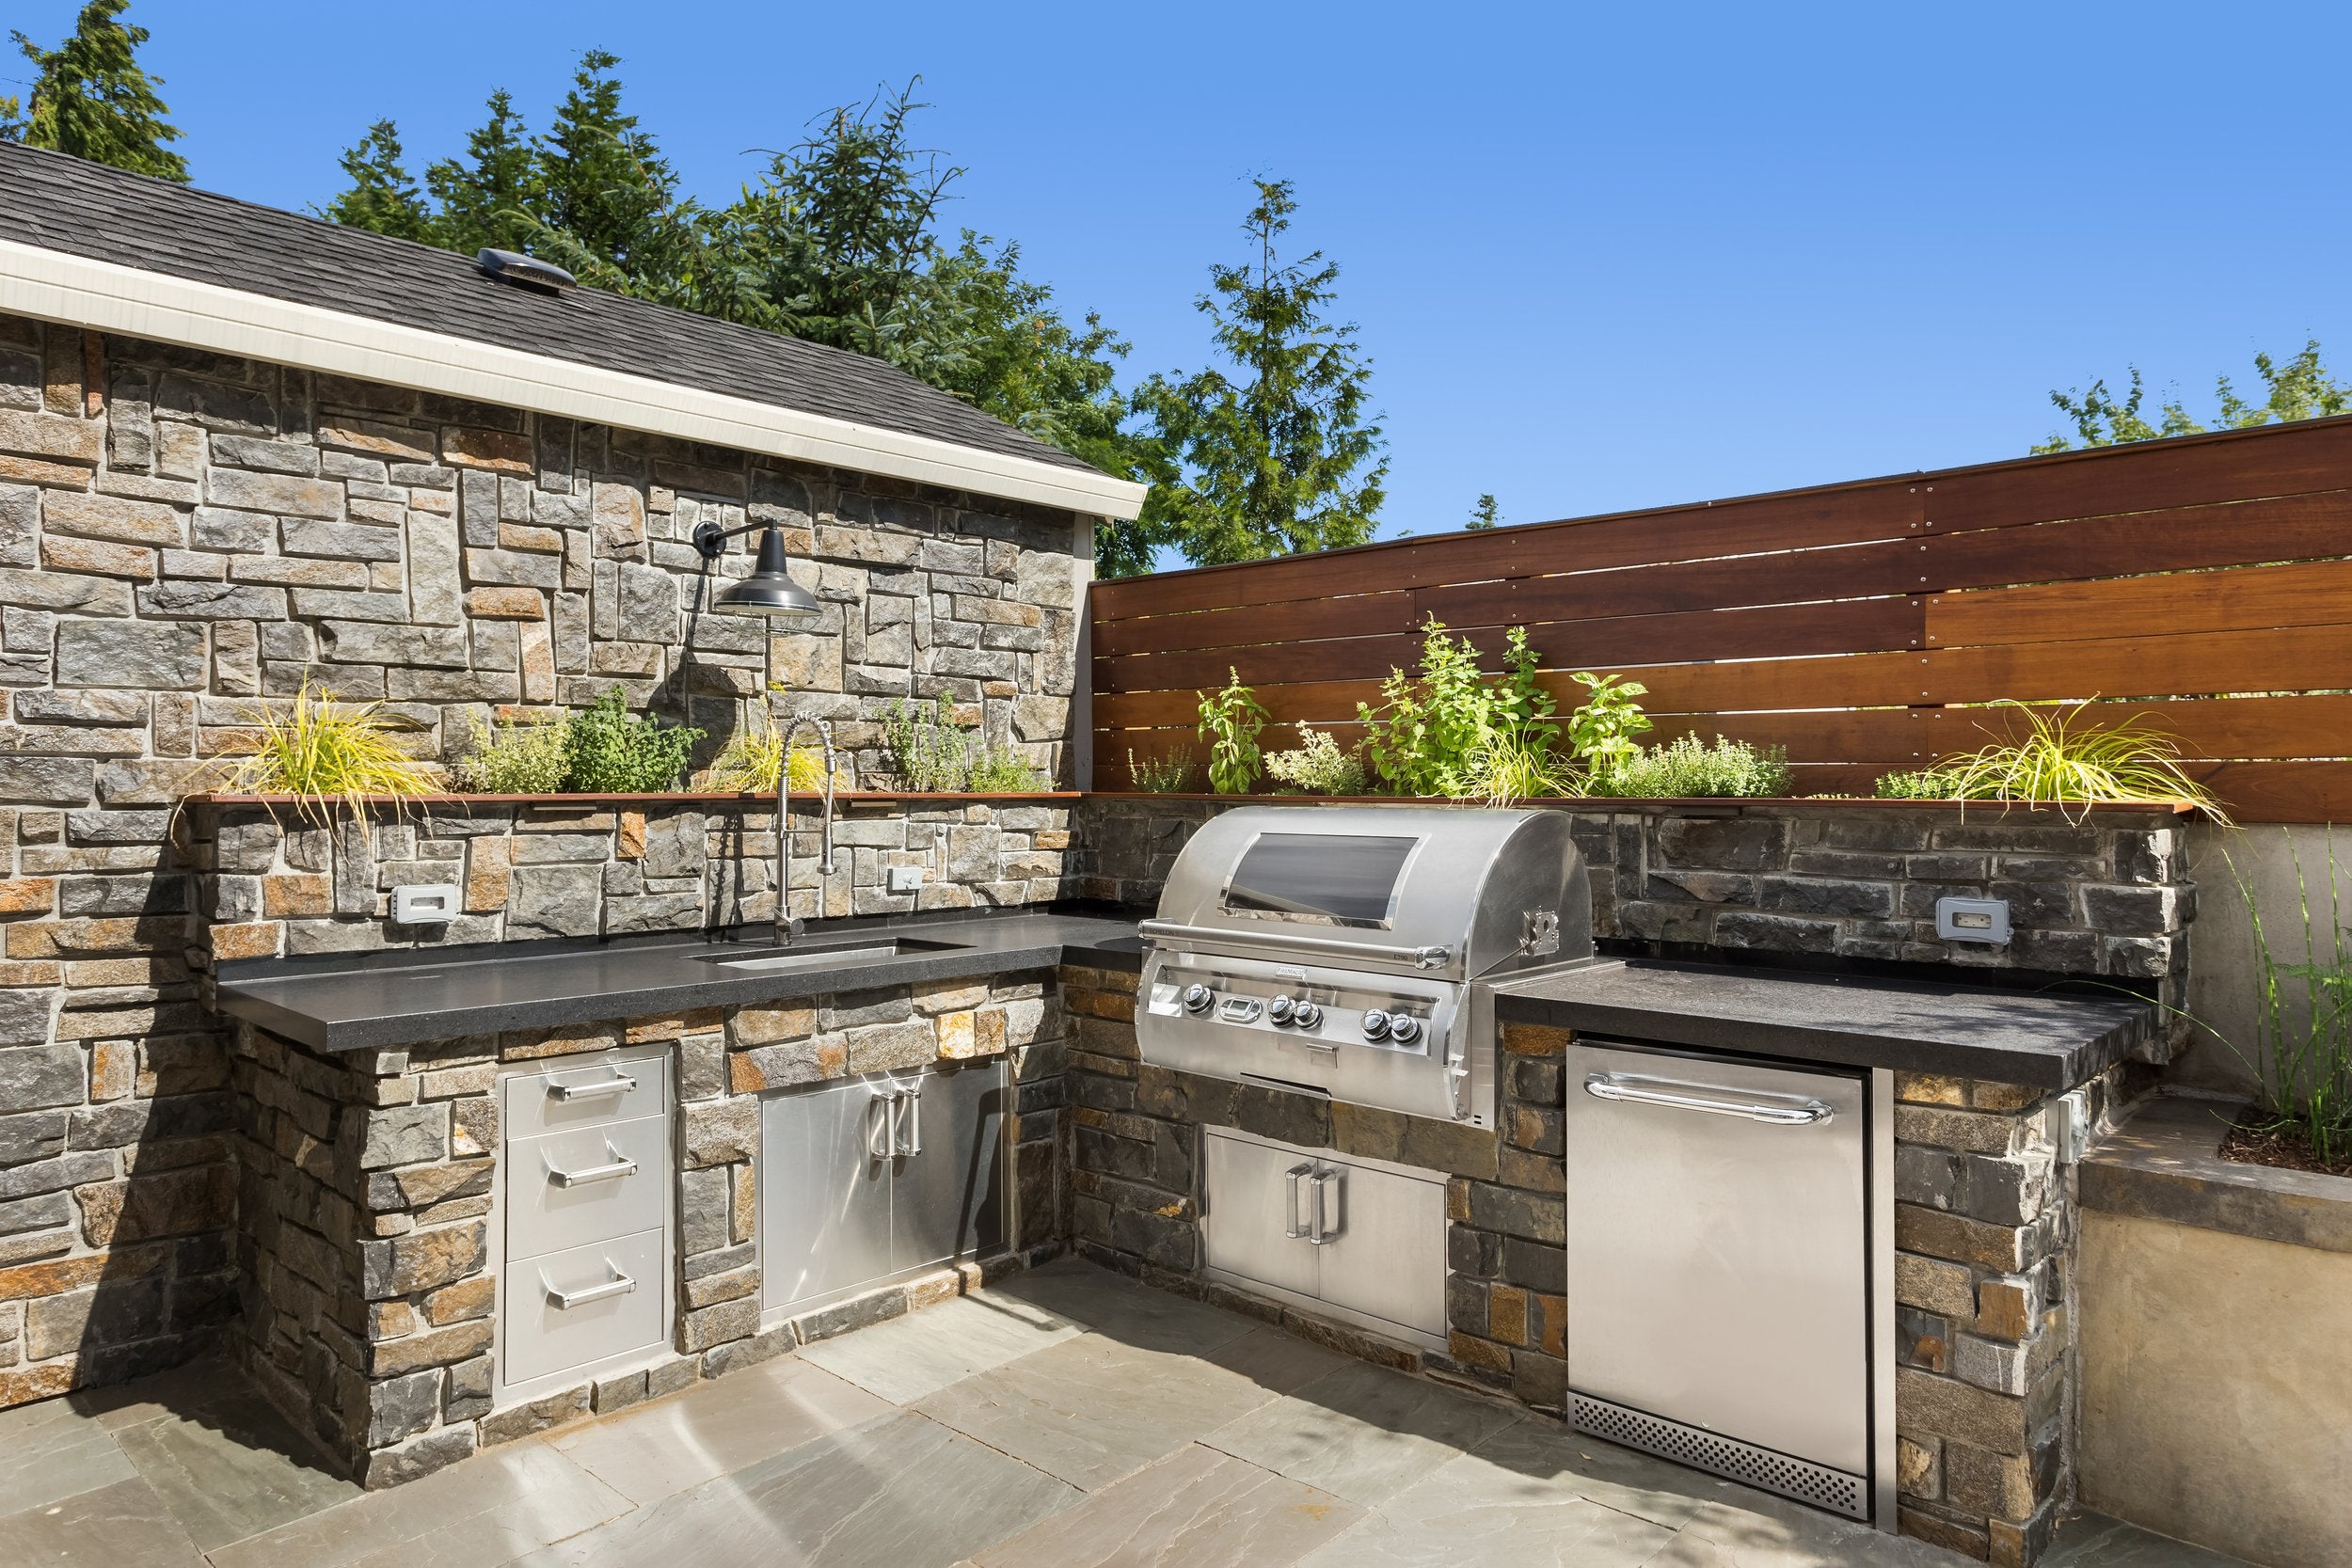 Transform Your Backyard into a Cooking Oasis